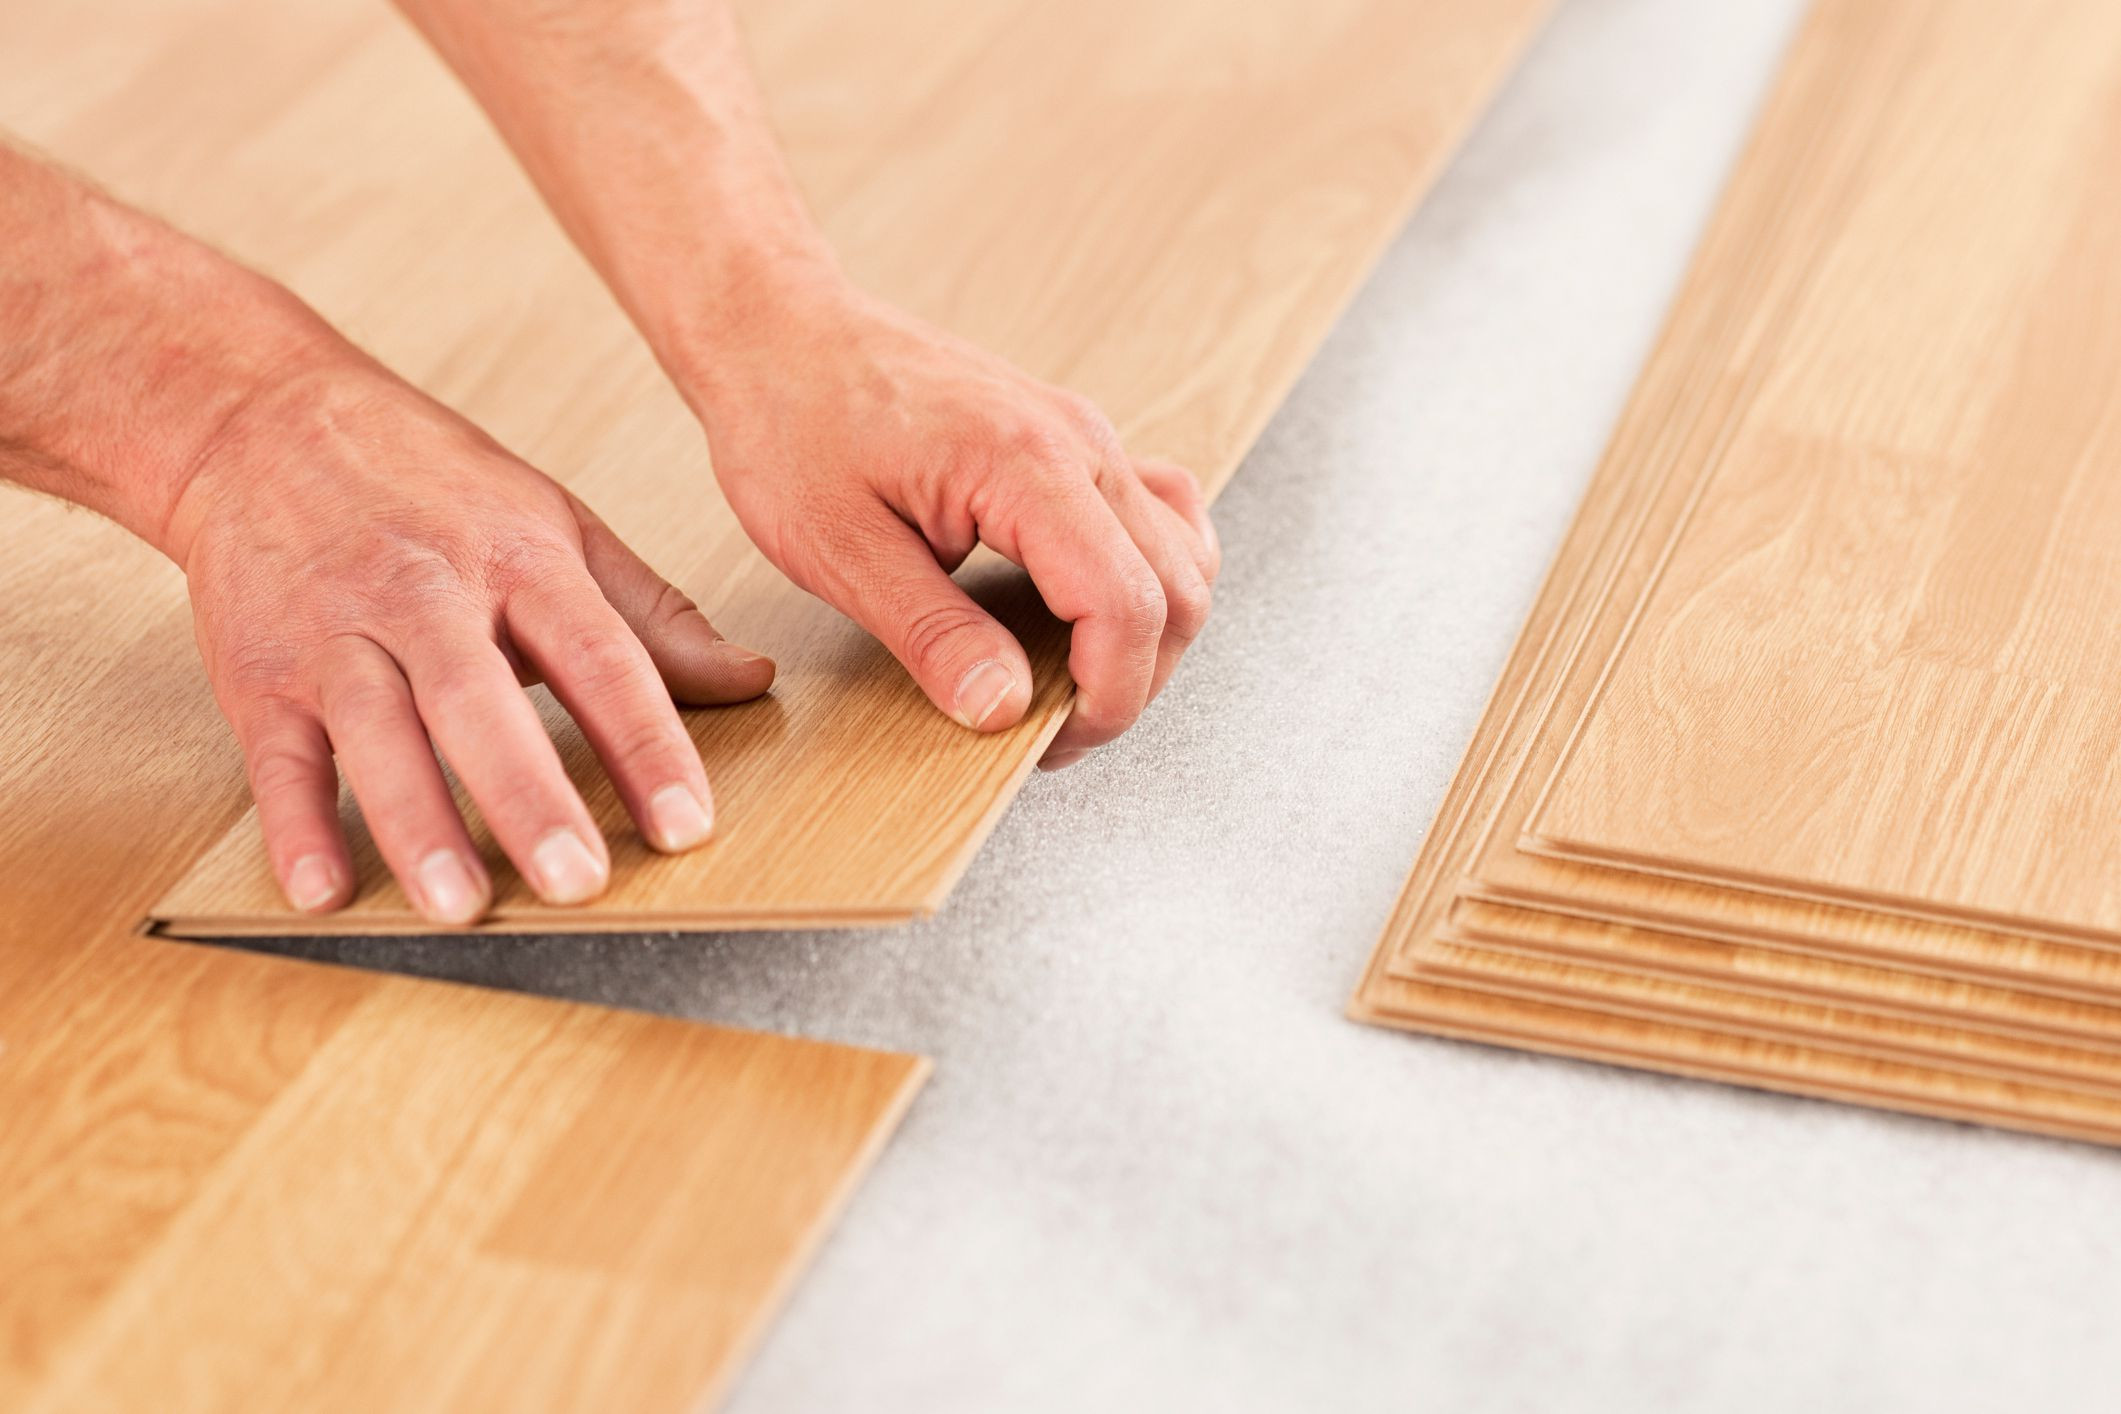 10 Popular How to Install Engineered Hardwood Floors Yourself 2024 free download how to install engineered hardwood floors yourself of laminate underlayment pros and cons in laminate floor install gettyimages 154961561 588816495f9b58bdb3da1a02